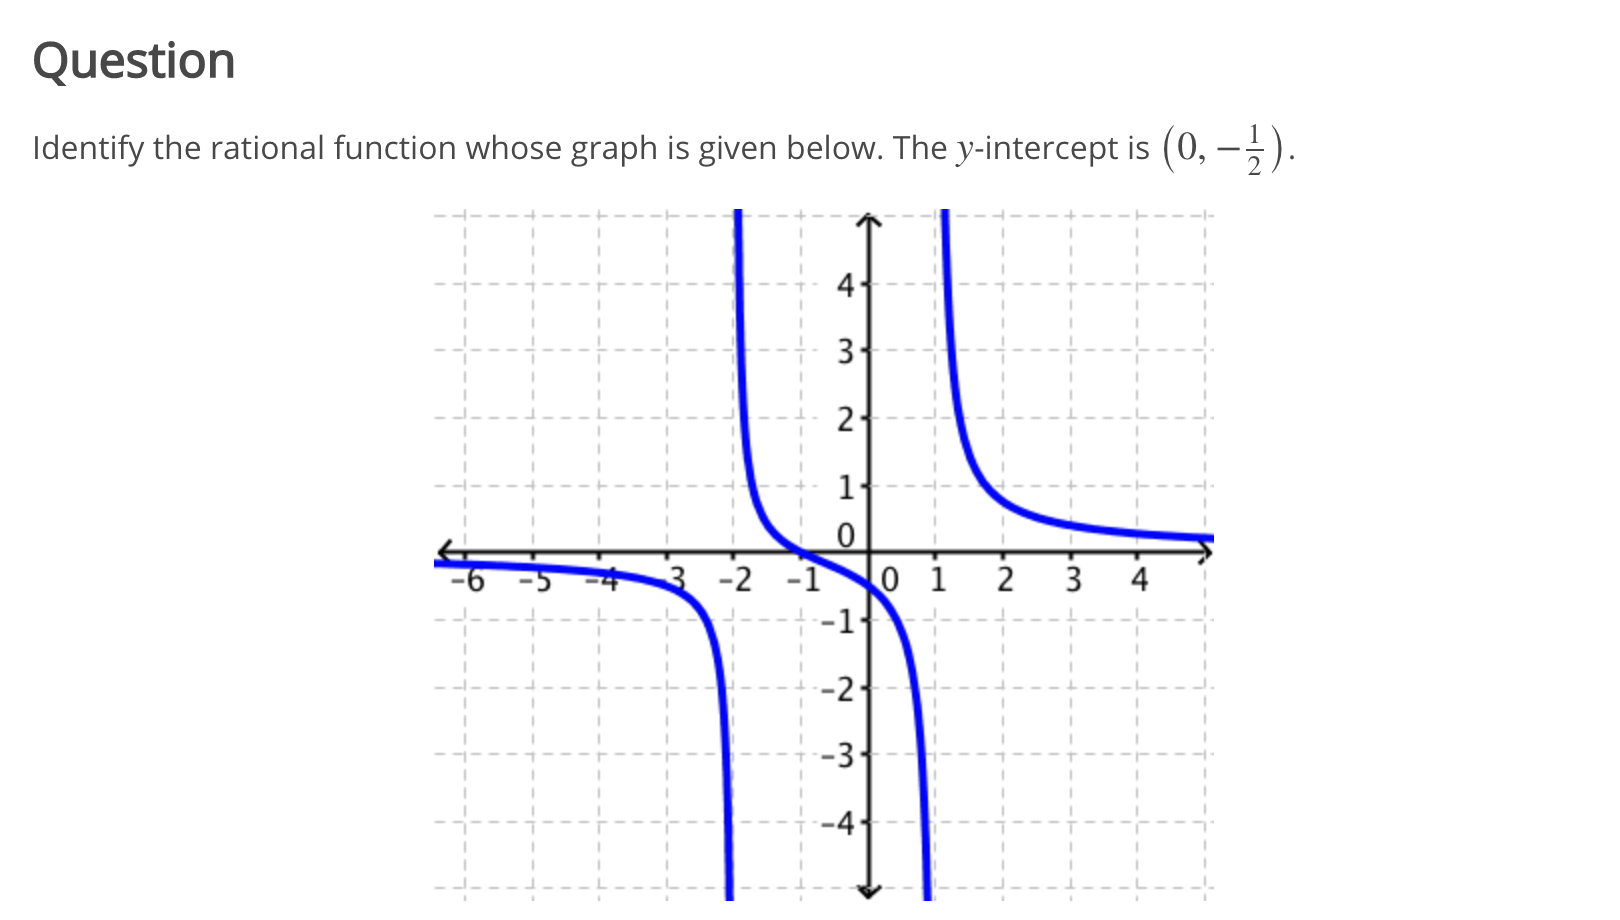 Identify the rational function whose graph is given below. The y-intercept is (0, –;).
4-
3
2-
1
R -2 -1
0 1
2
3
4
-1
-2
-3
-4
